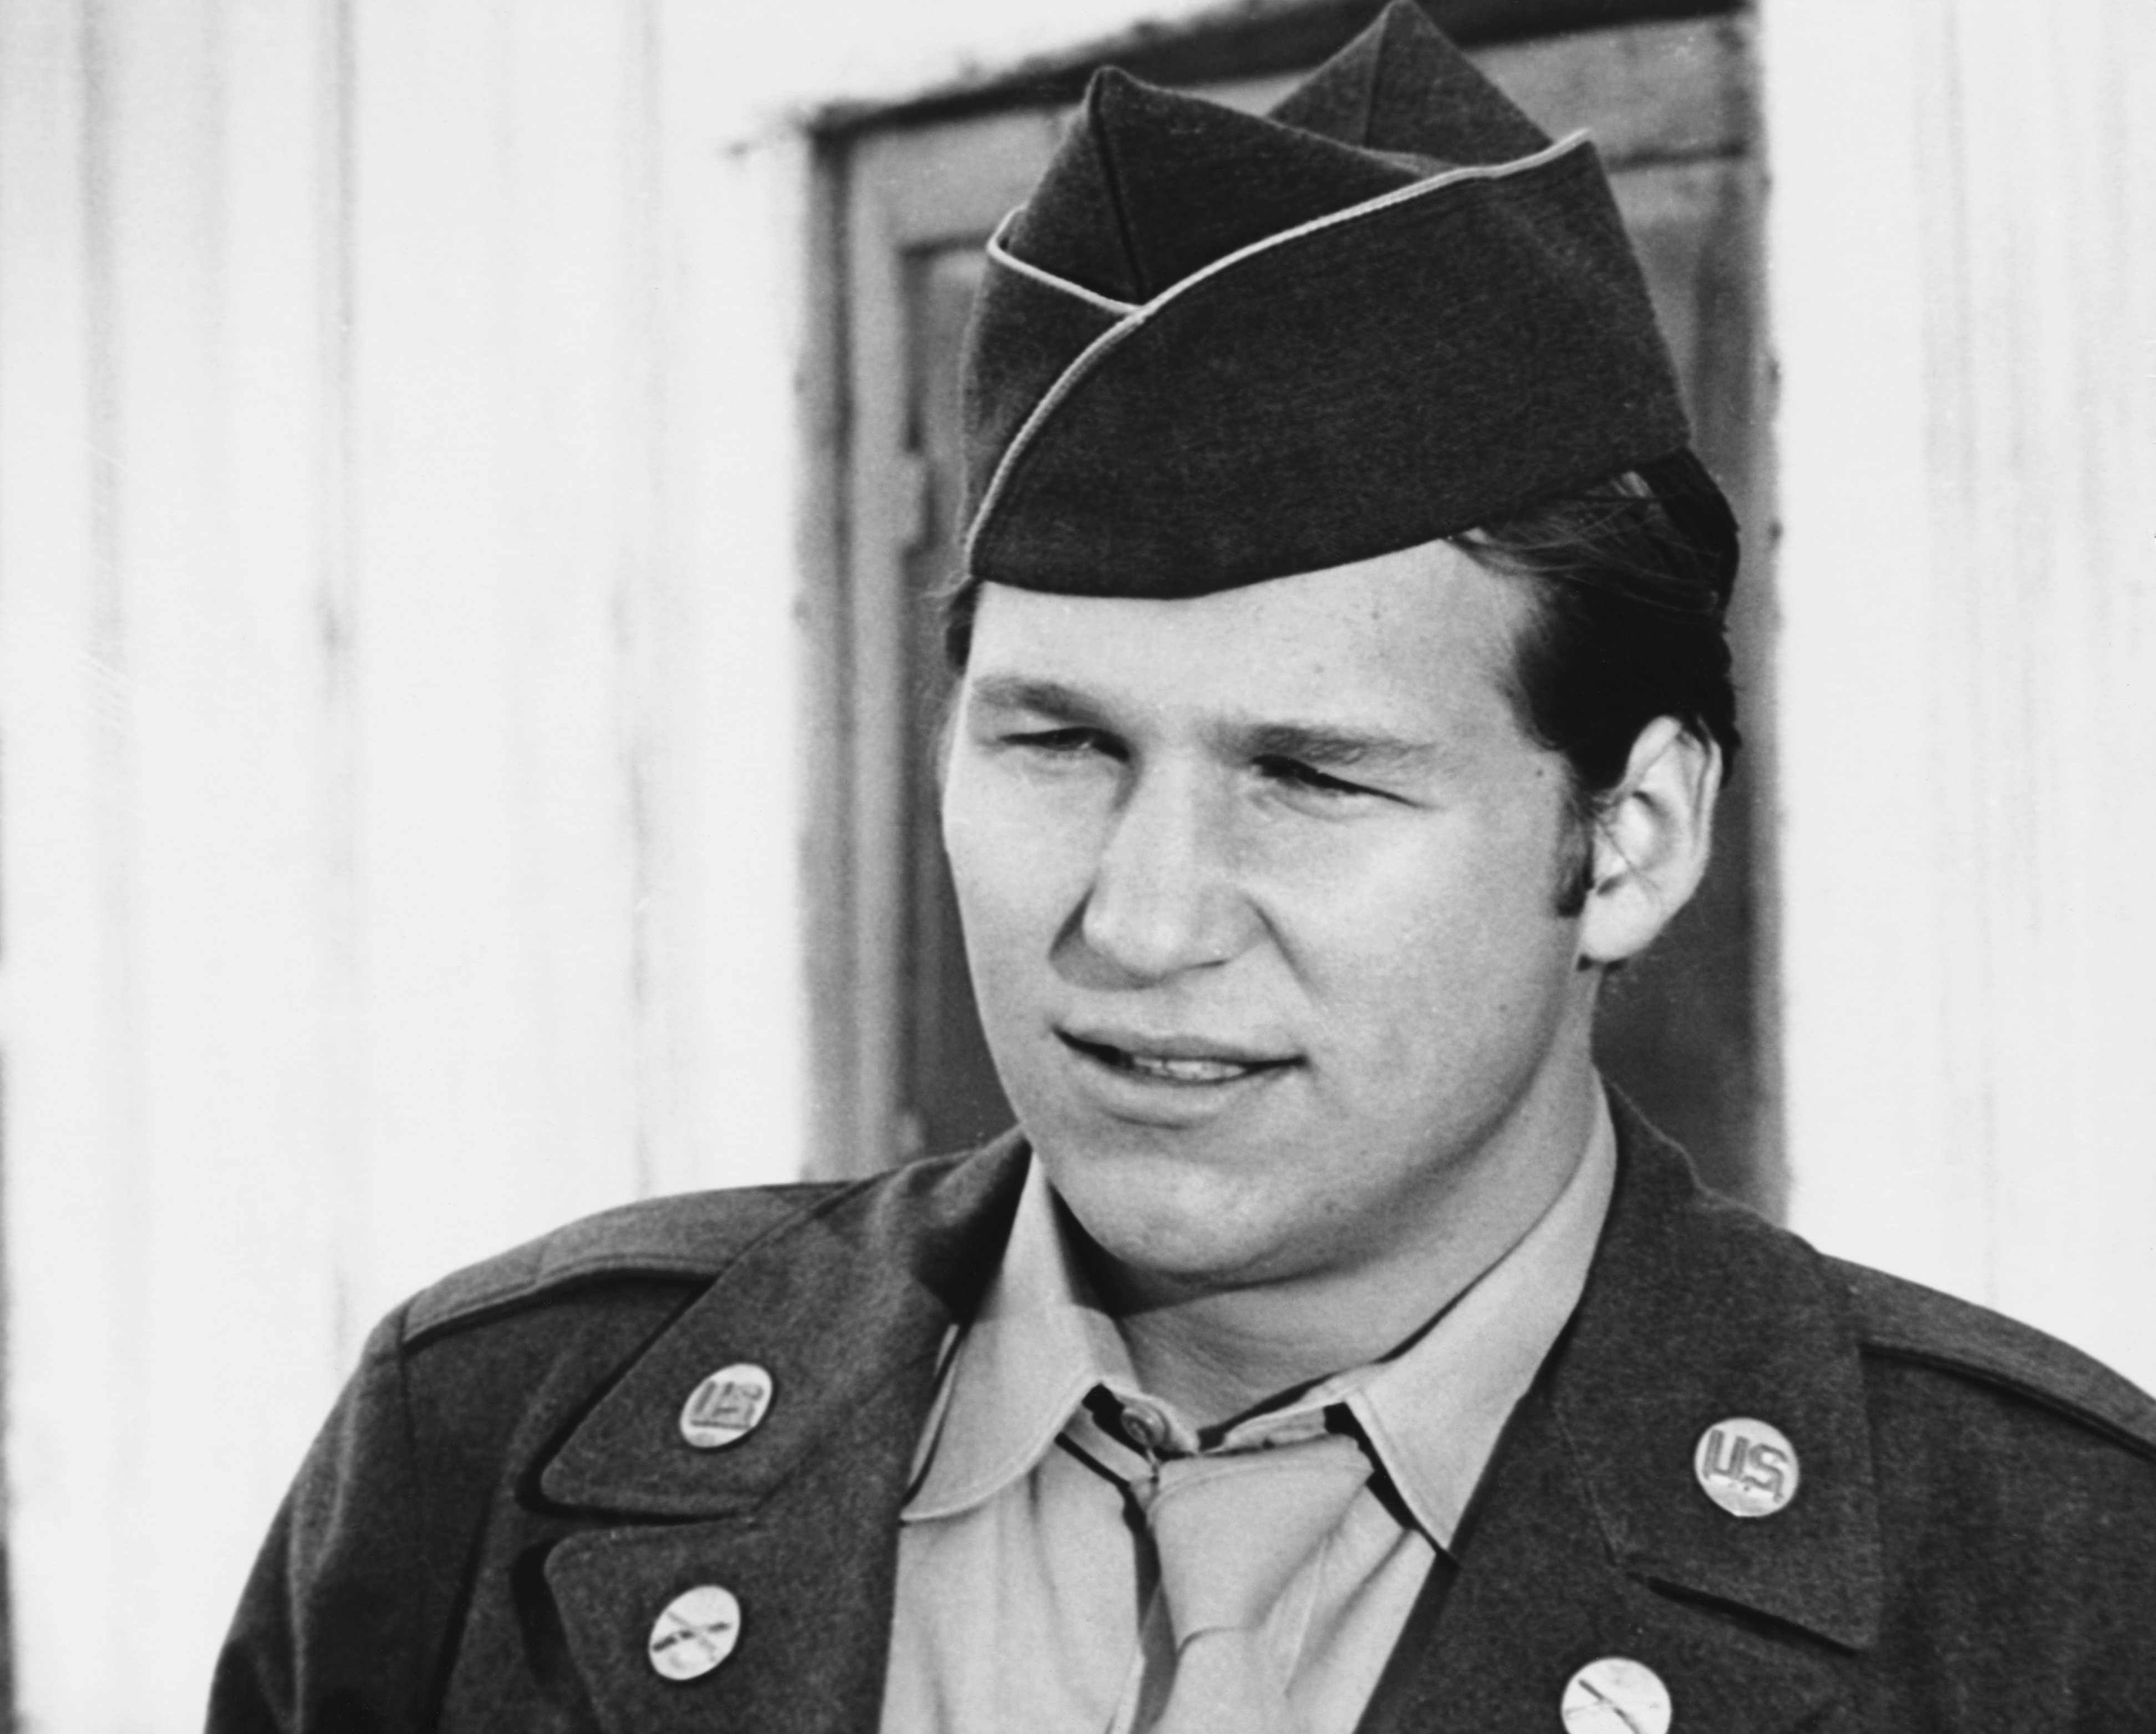 Jeff Bridges as Duane Moore in the 1971 film "The Last Picture Show" | Source: Getty Images